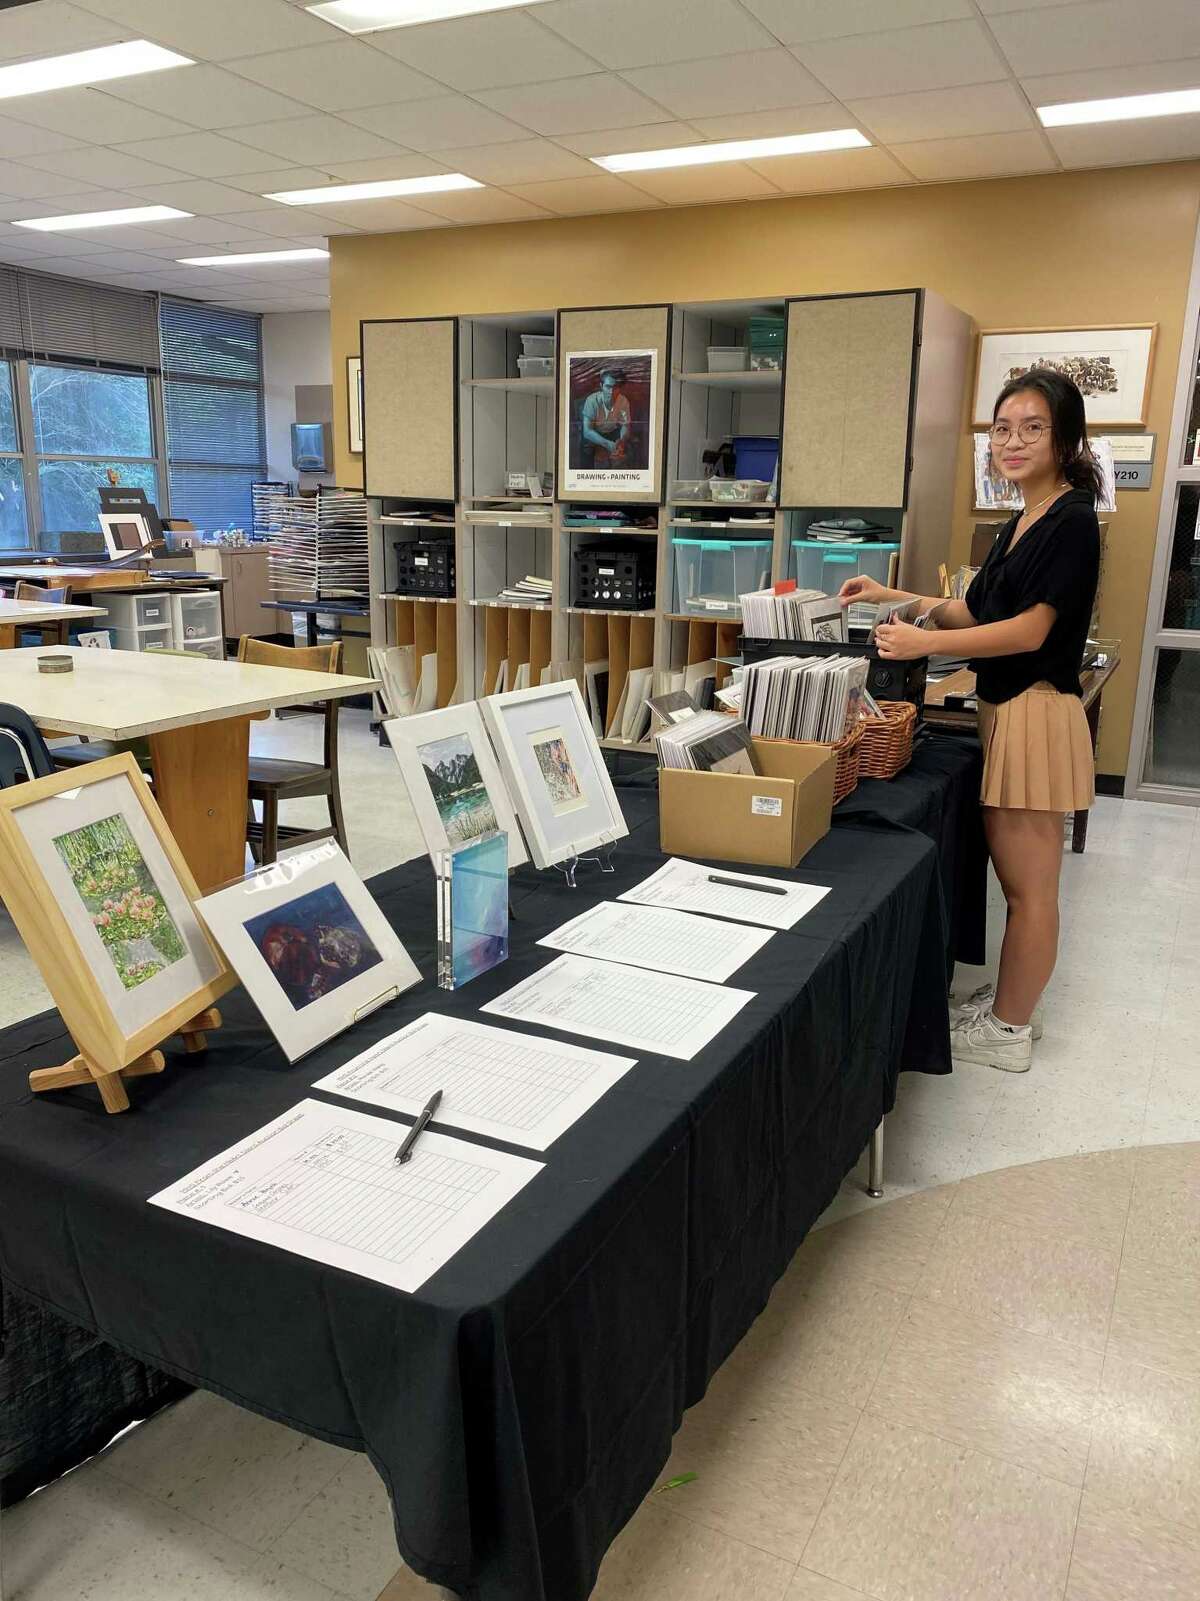 The artworks that the Memorial High school visual art students created for the “from the heART” fundraiser were displayed in the school’s art room and then brought to the cafeteria and sold during the lunch periods.